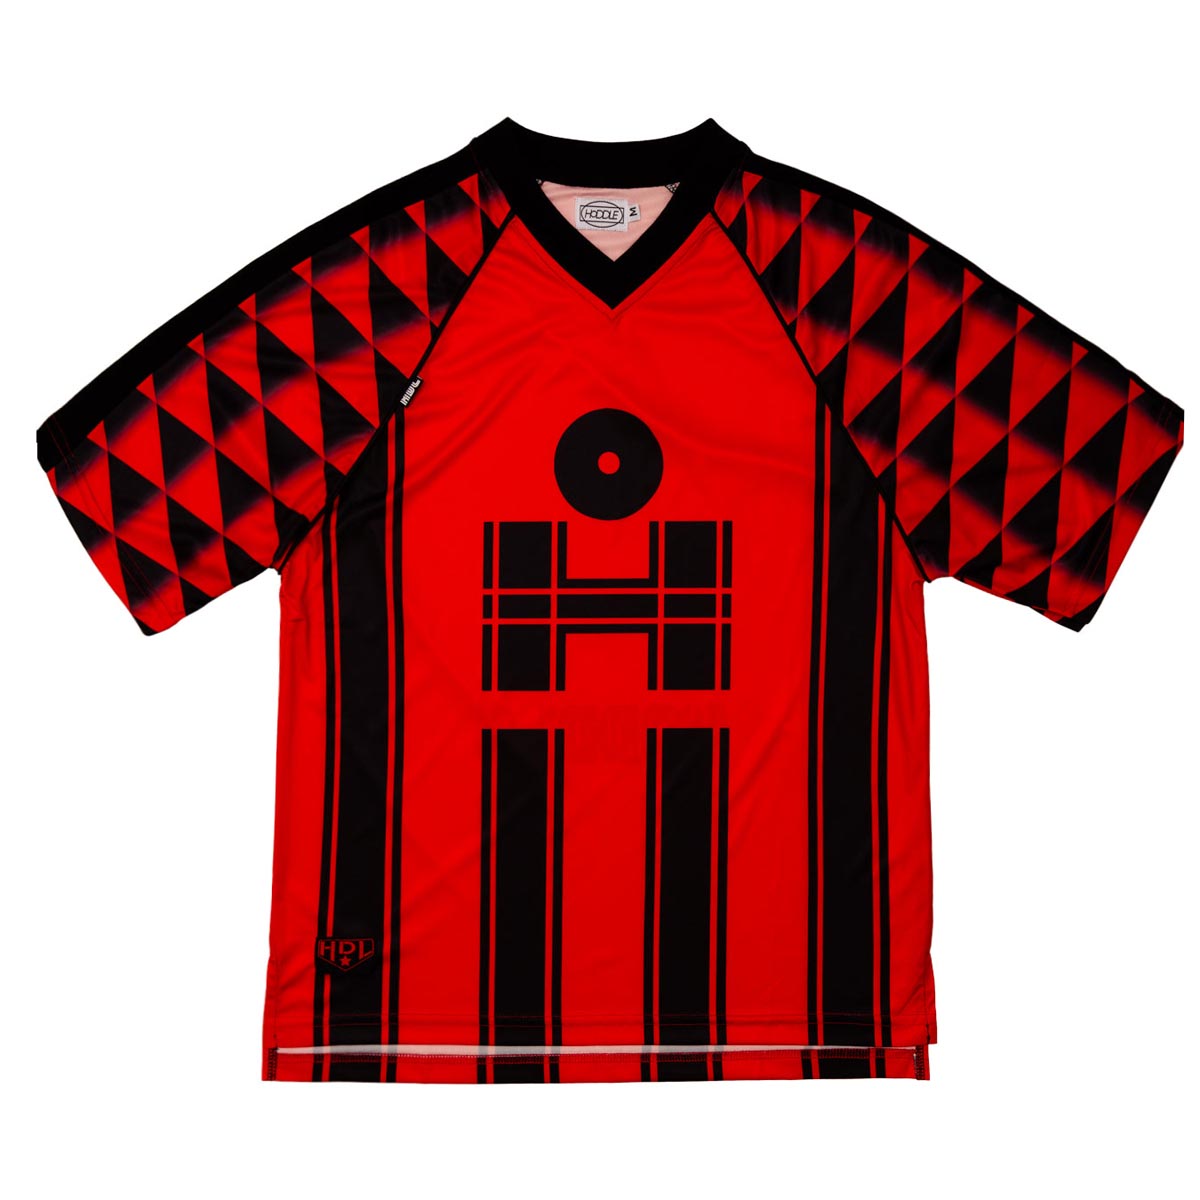 Hoddle Football Jersey - Red/Black image 1